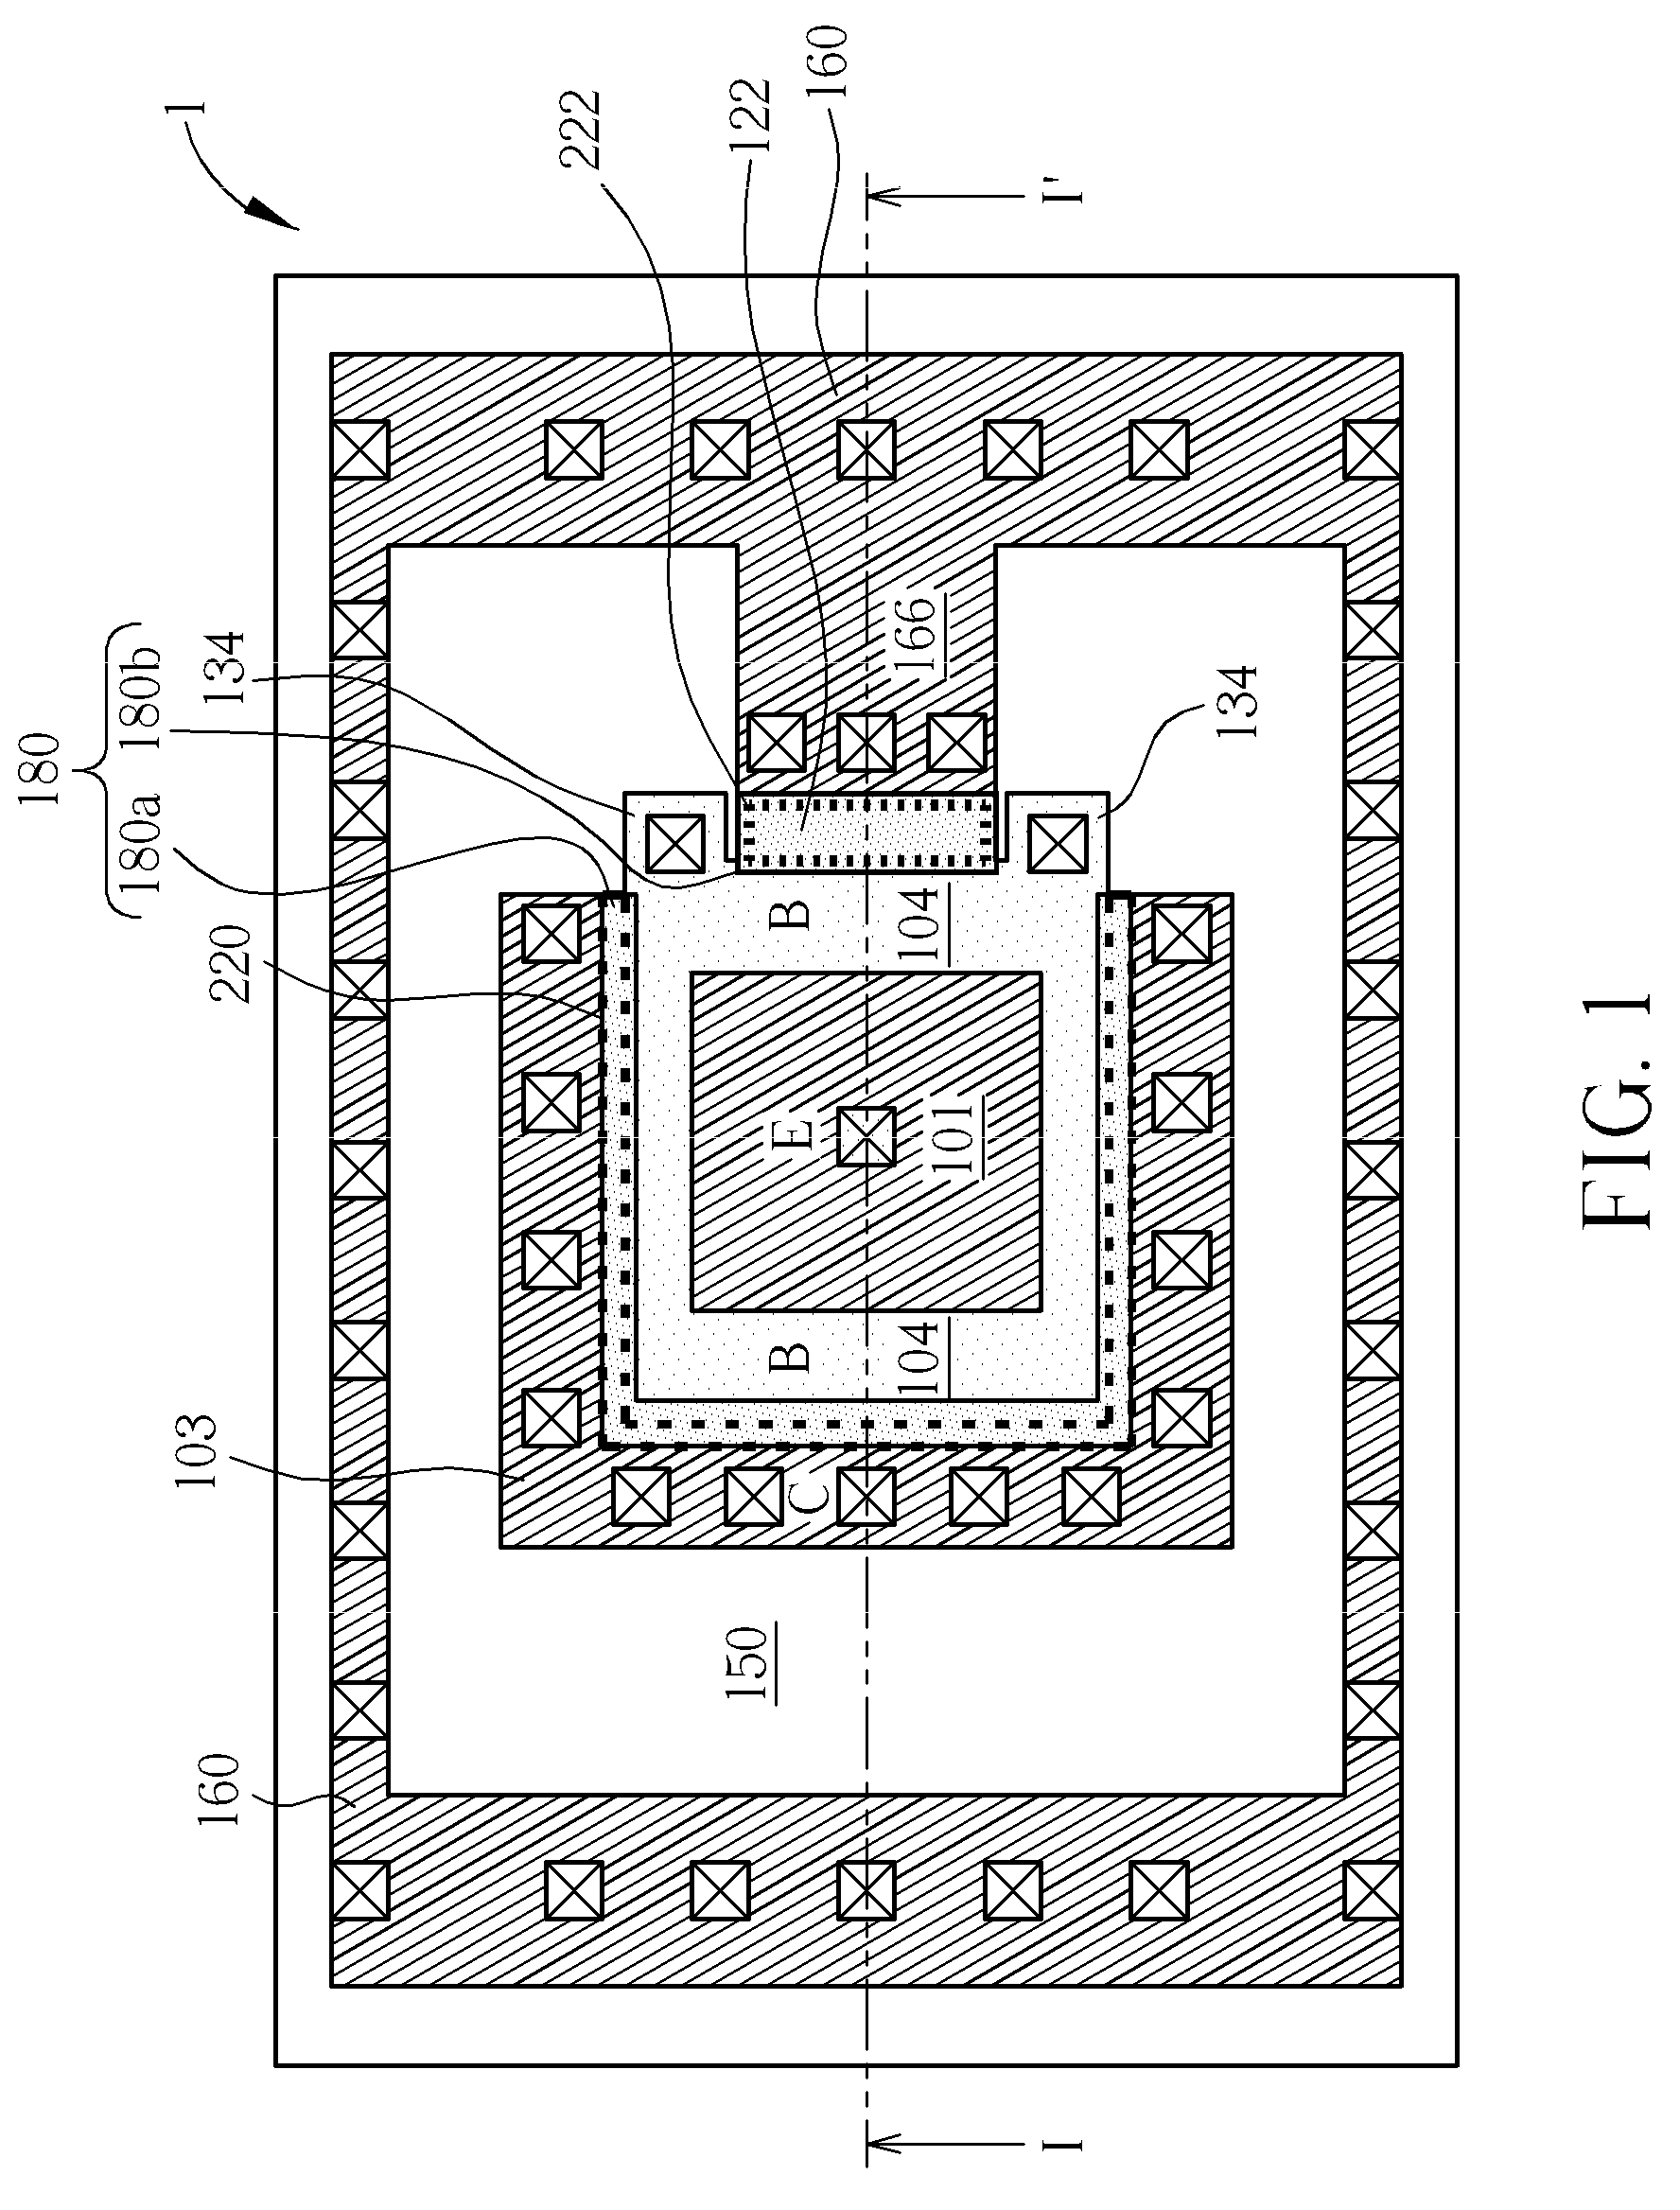 Lateral bipolar junction transistor with reduced base resistance